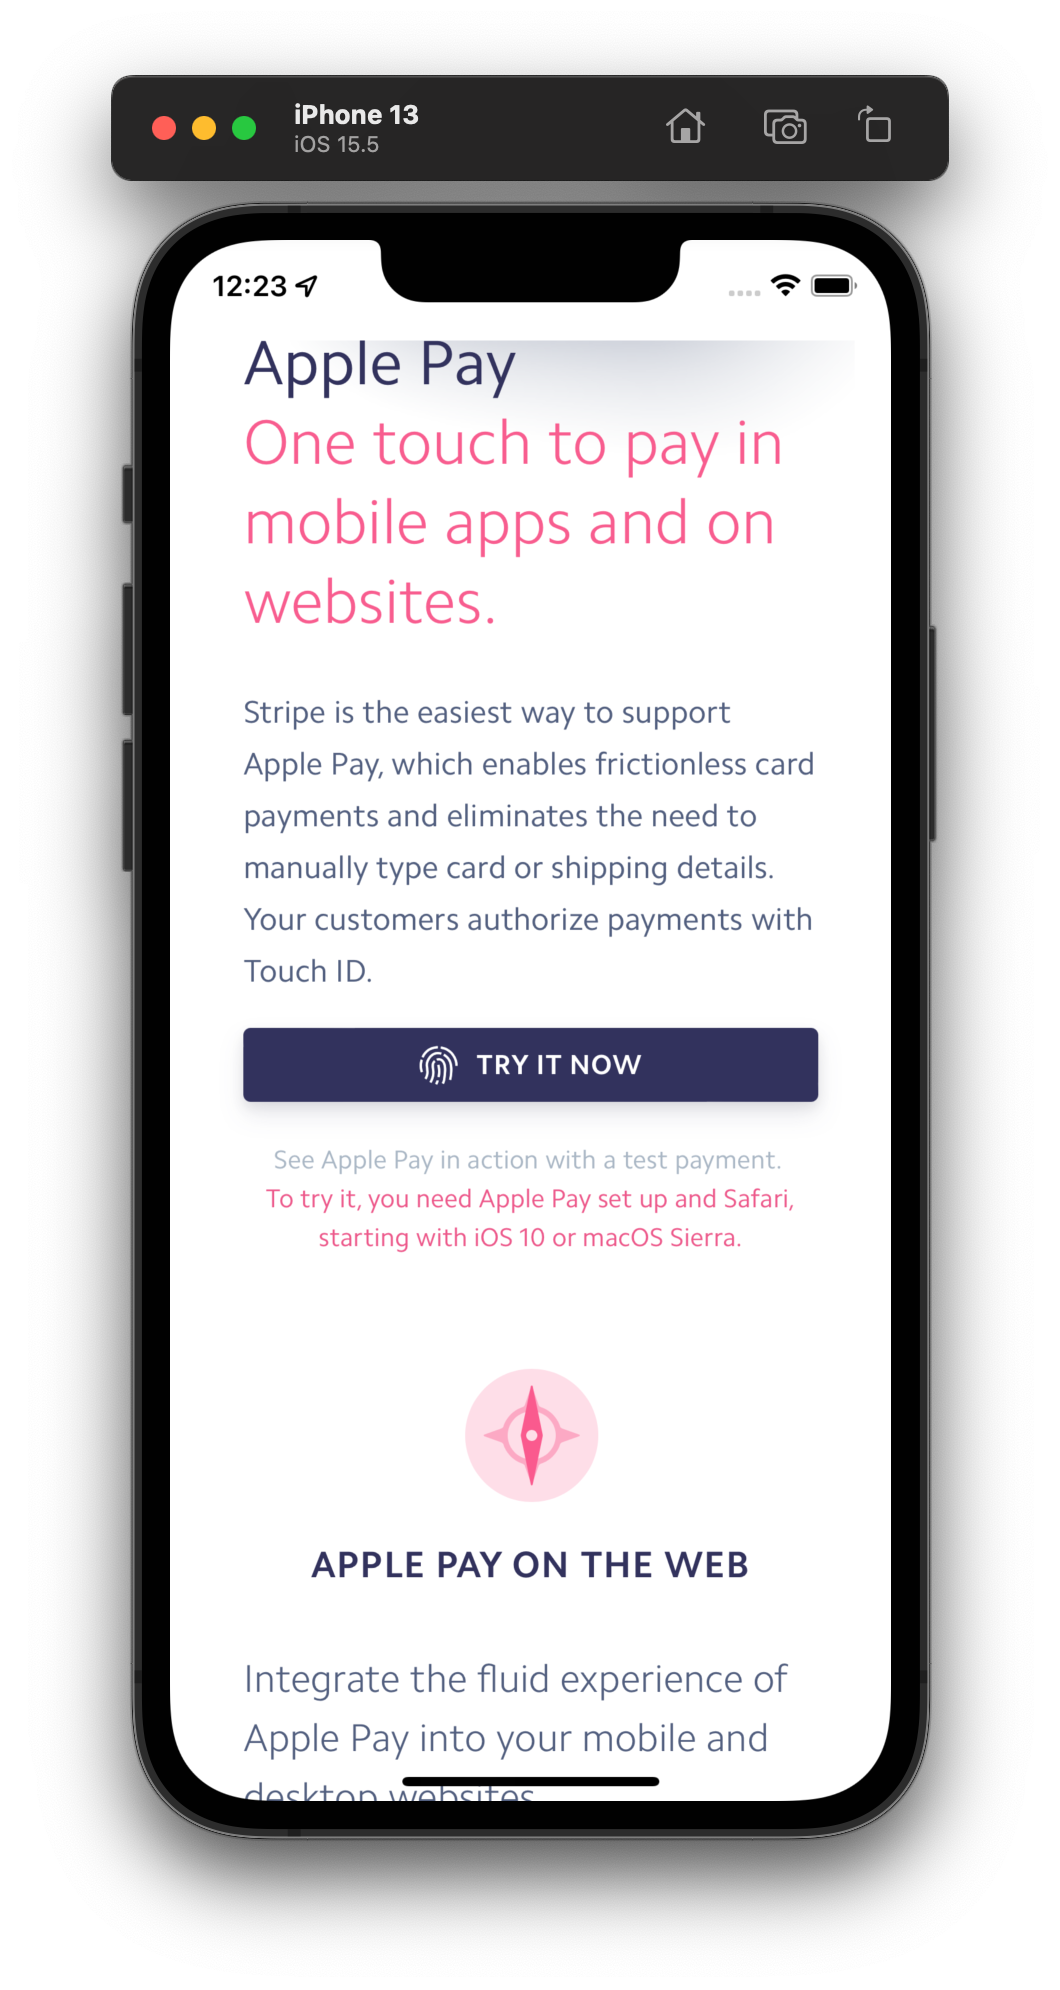 Twyp integrates with Apple Pay and now allows payments from the iPhone